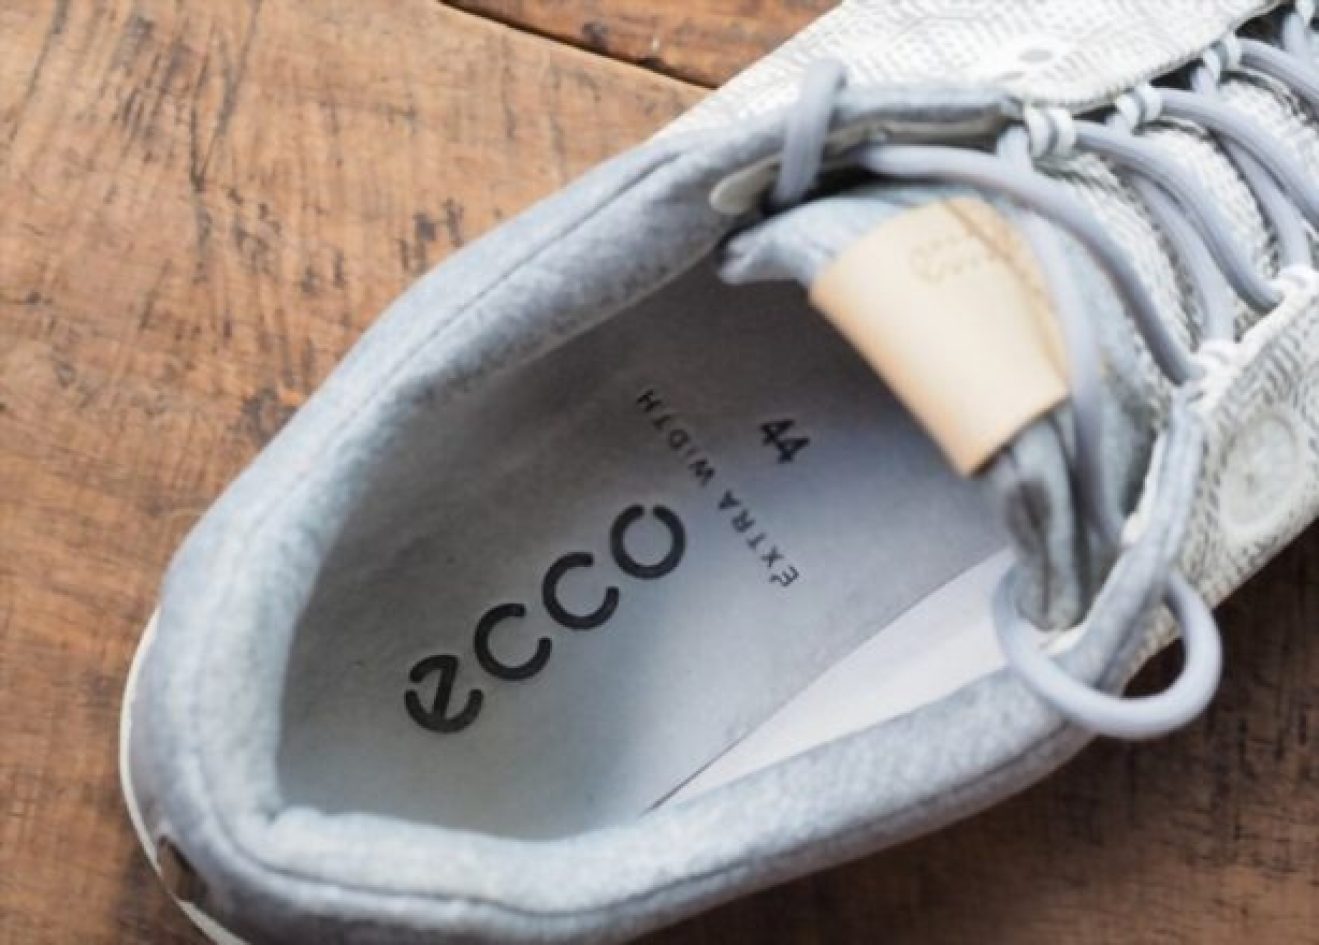 Ecco Shoe Size Chart Find Your Ecco Shoe Sizing The Shoe Box NYC